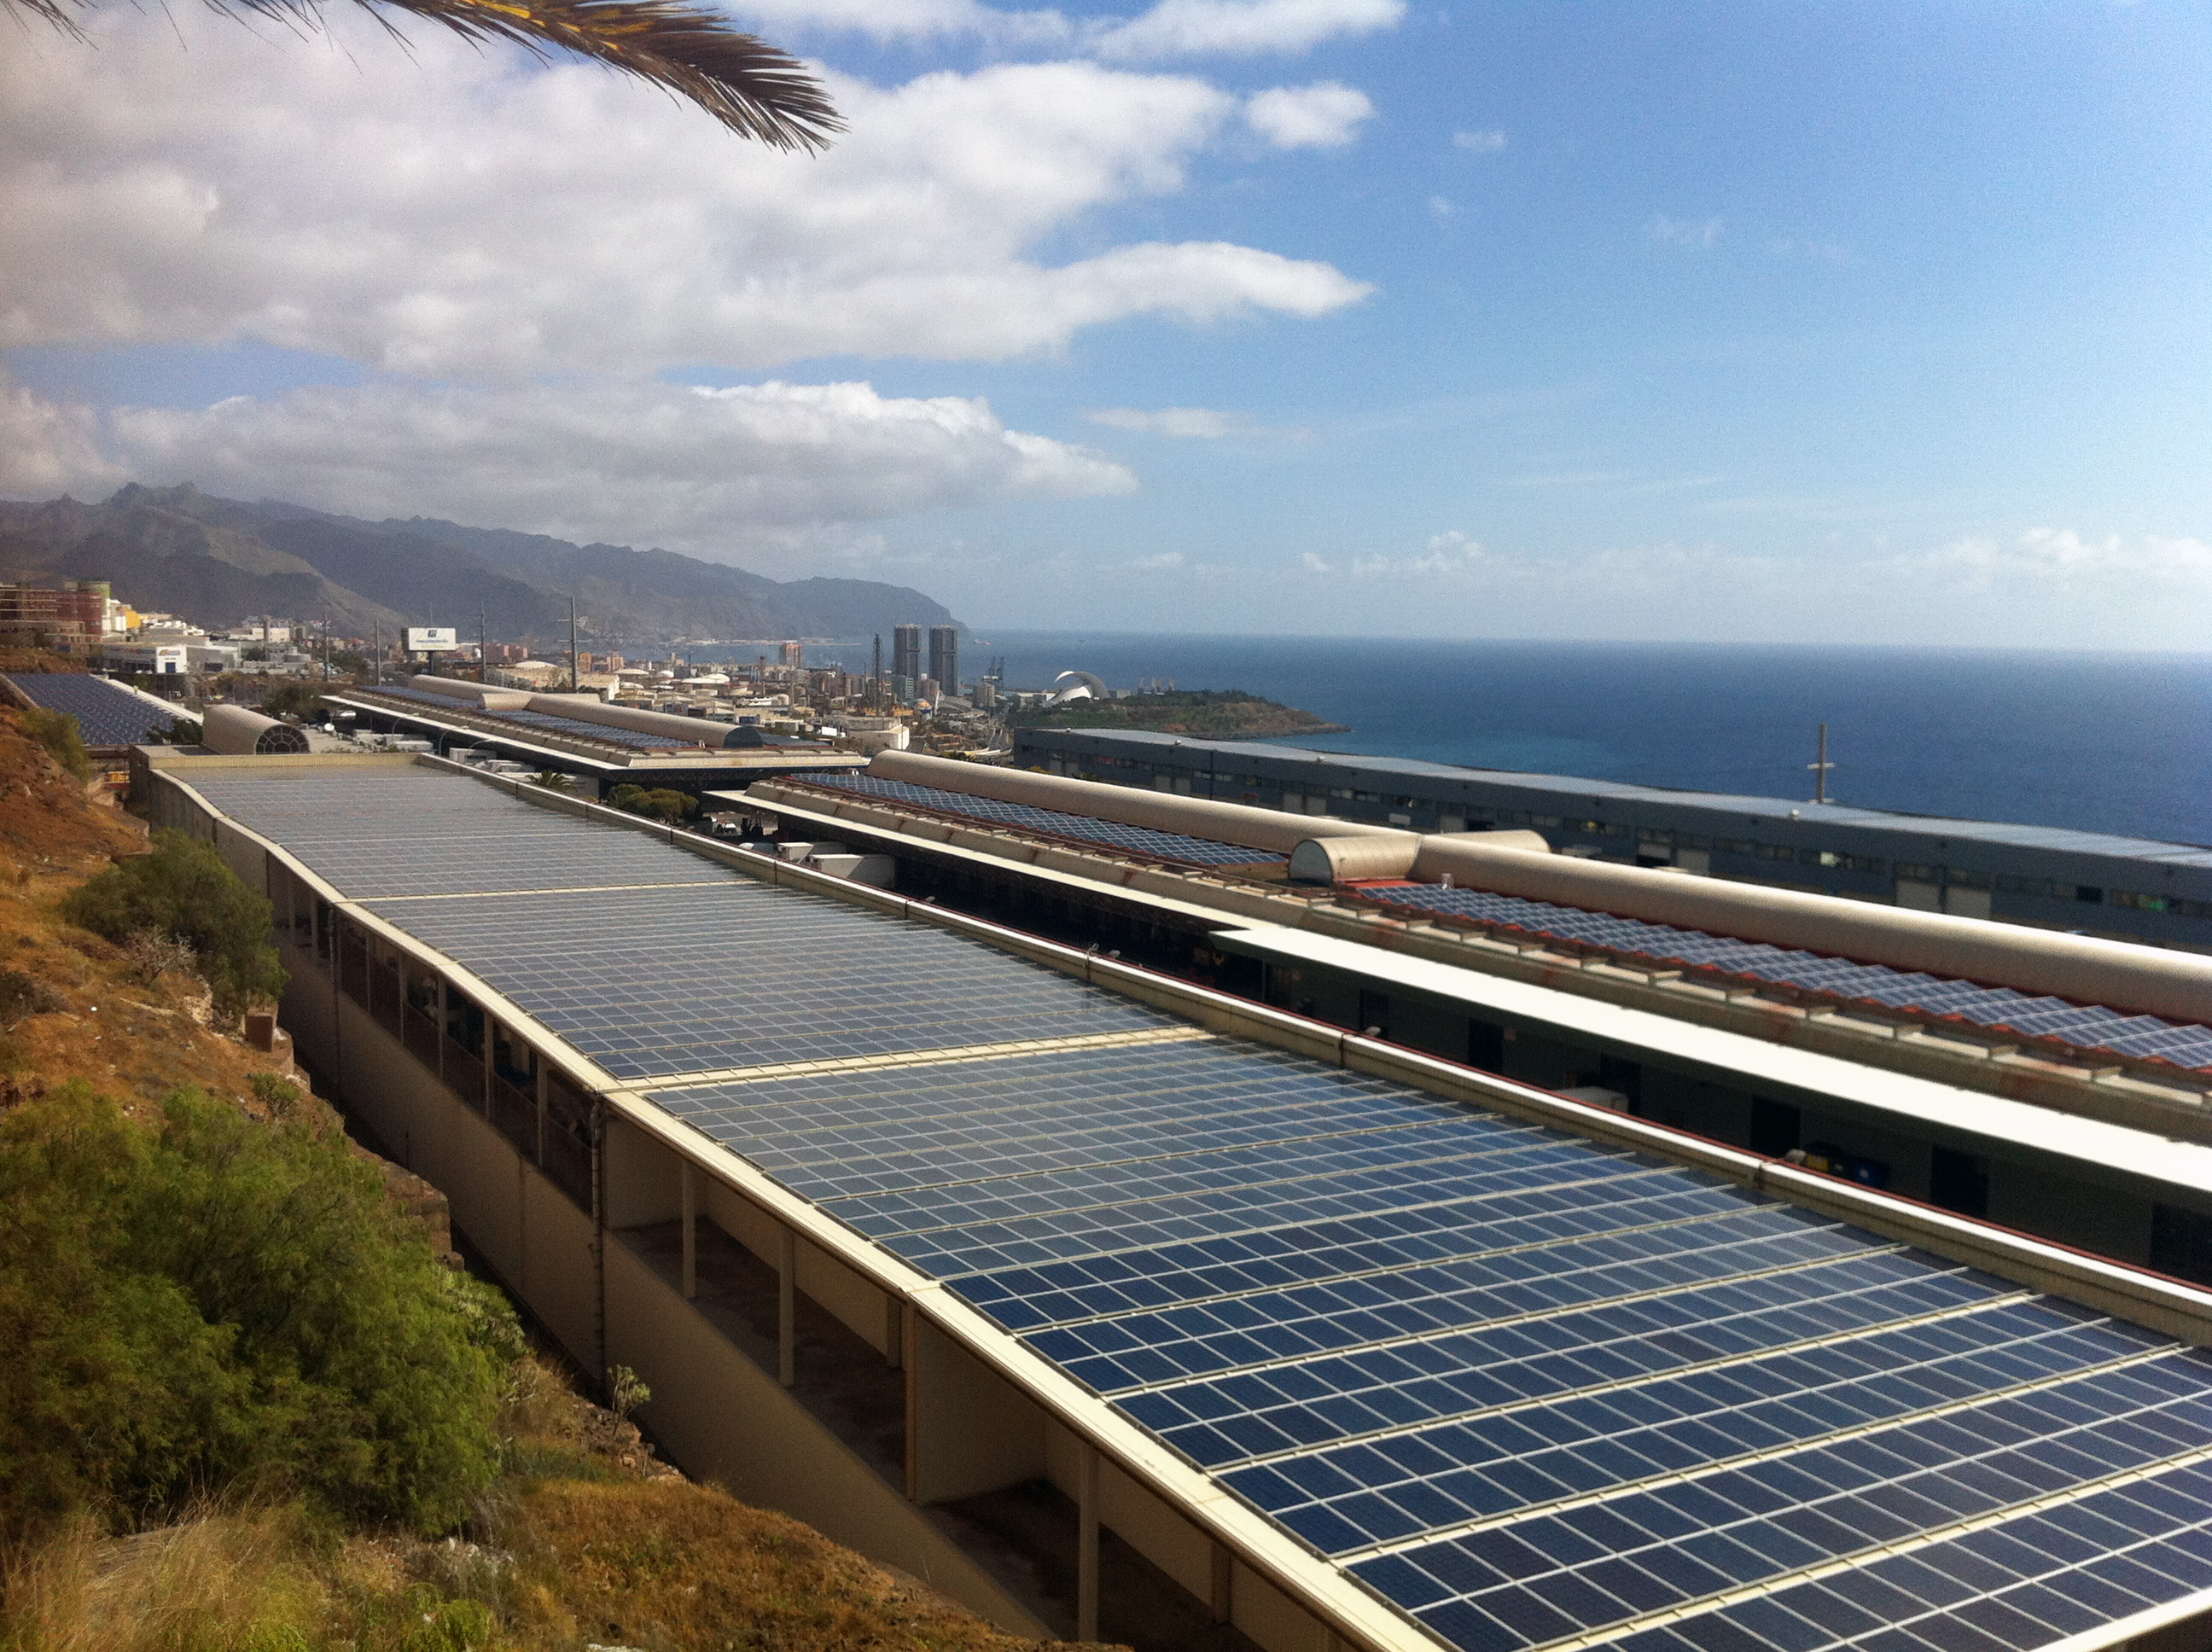 https://www.evwind.com/wp-content/uploads/2013/03/Rooftop-installation-with-1_5-MW-Conergy-modules_Tenerife_Canary-Islands.jpg